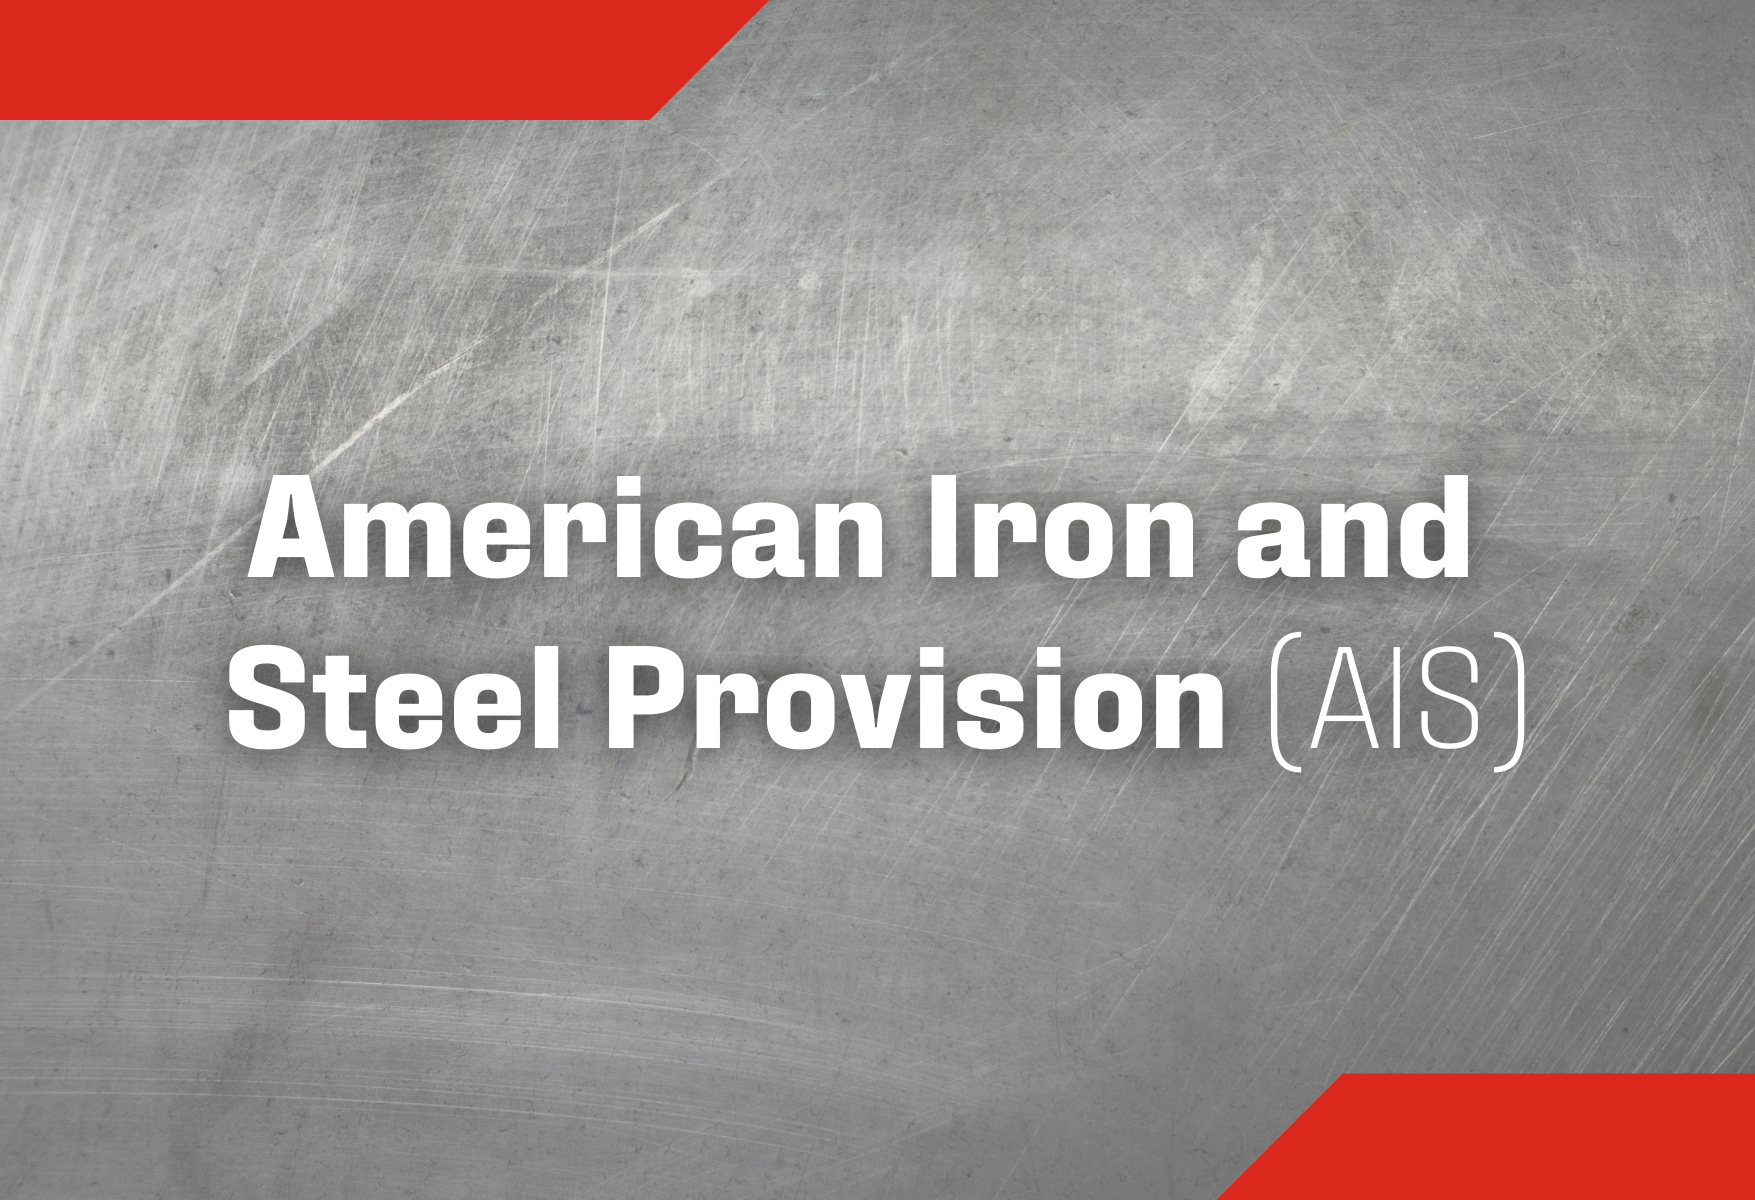 American Iron and Steel Provision (AIS) Program